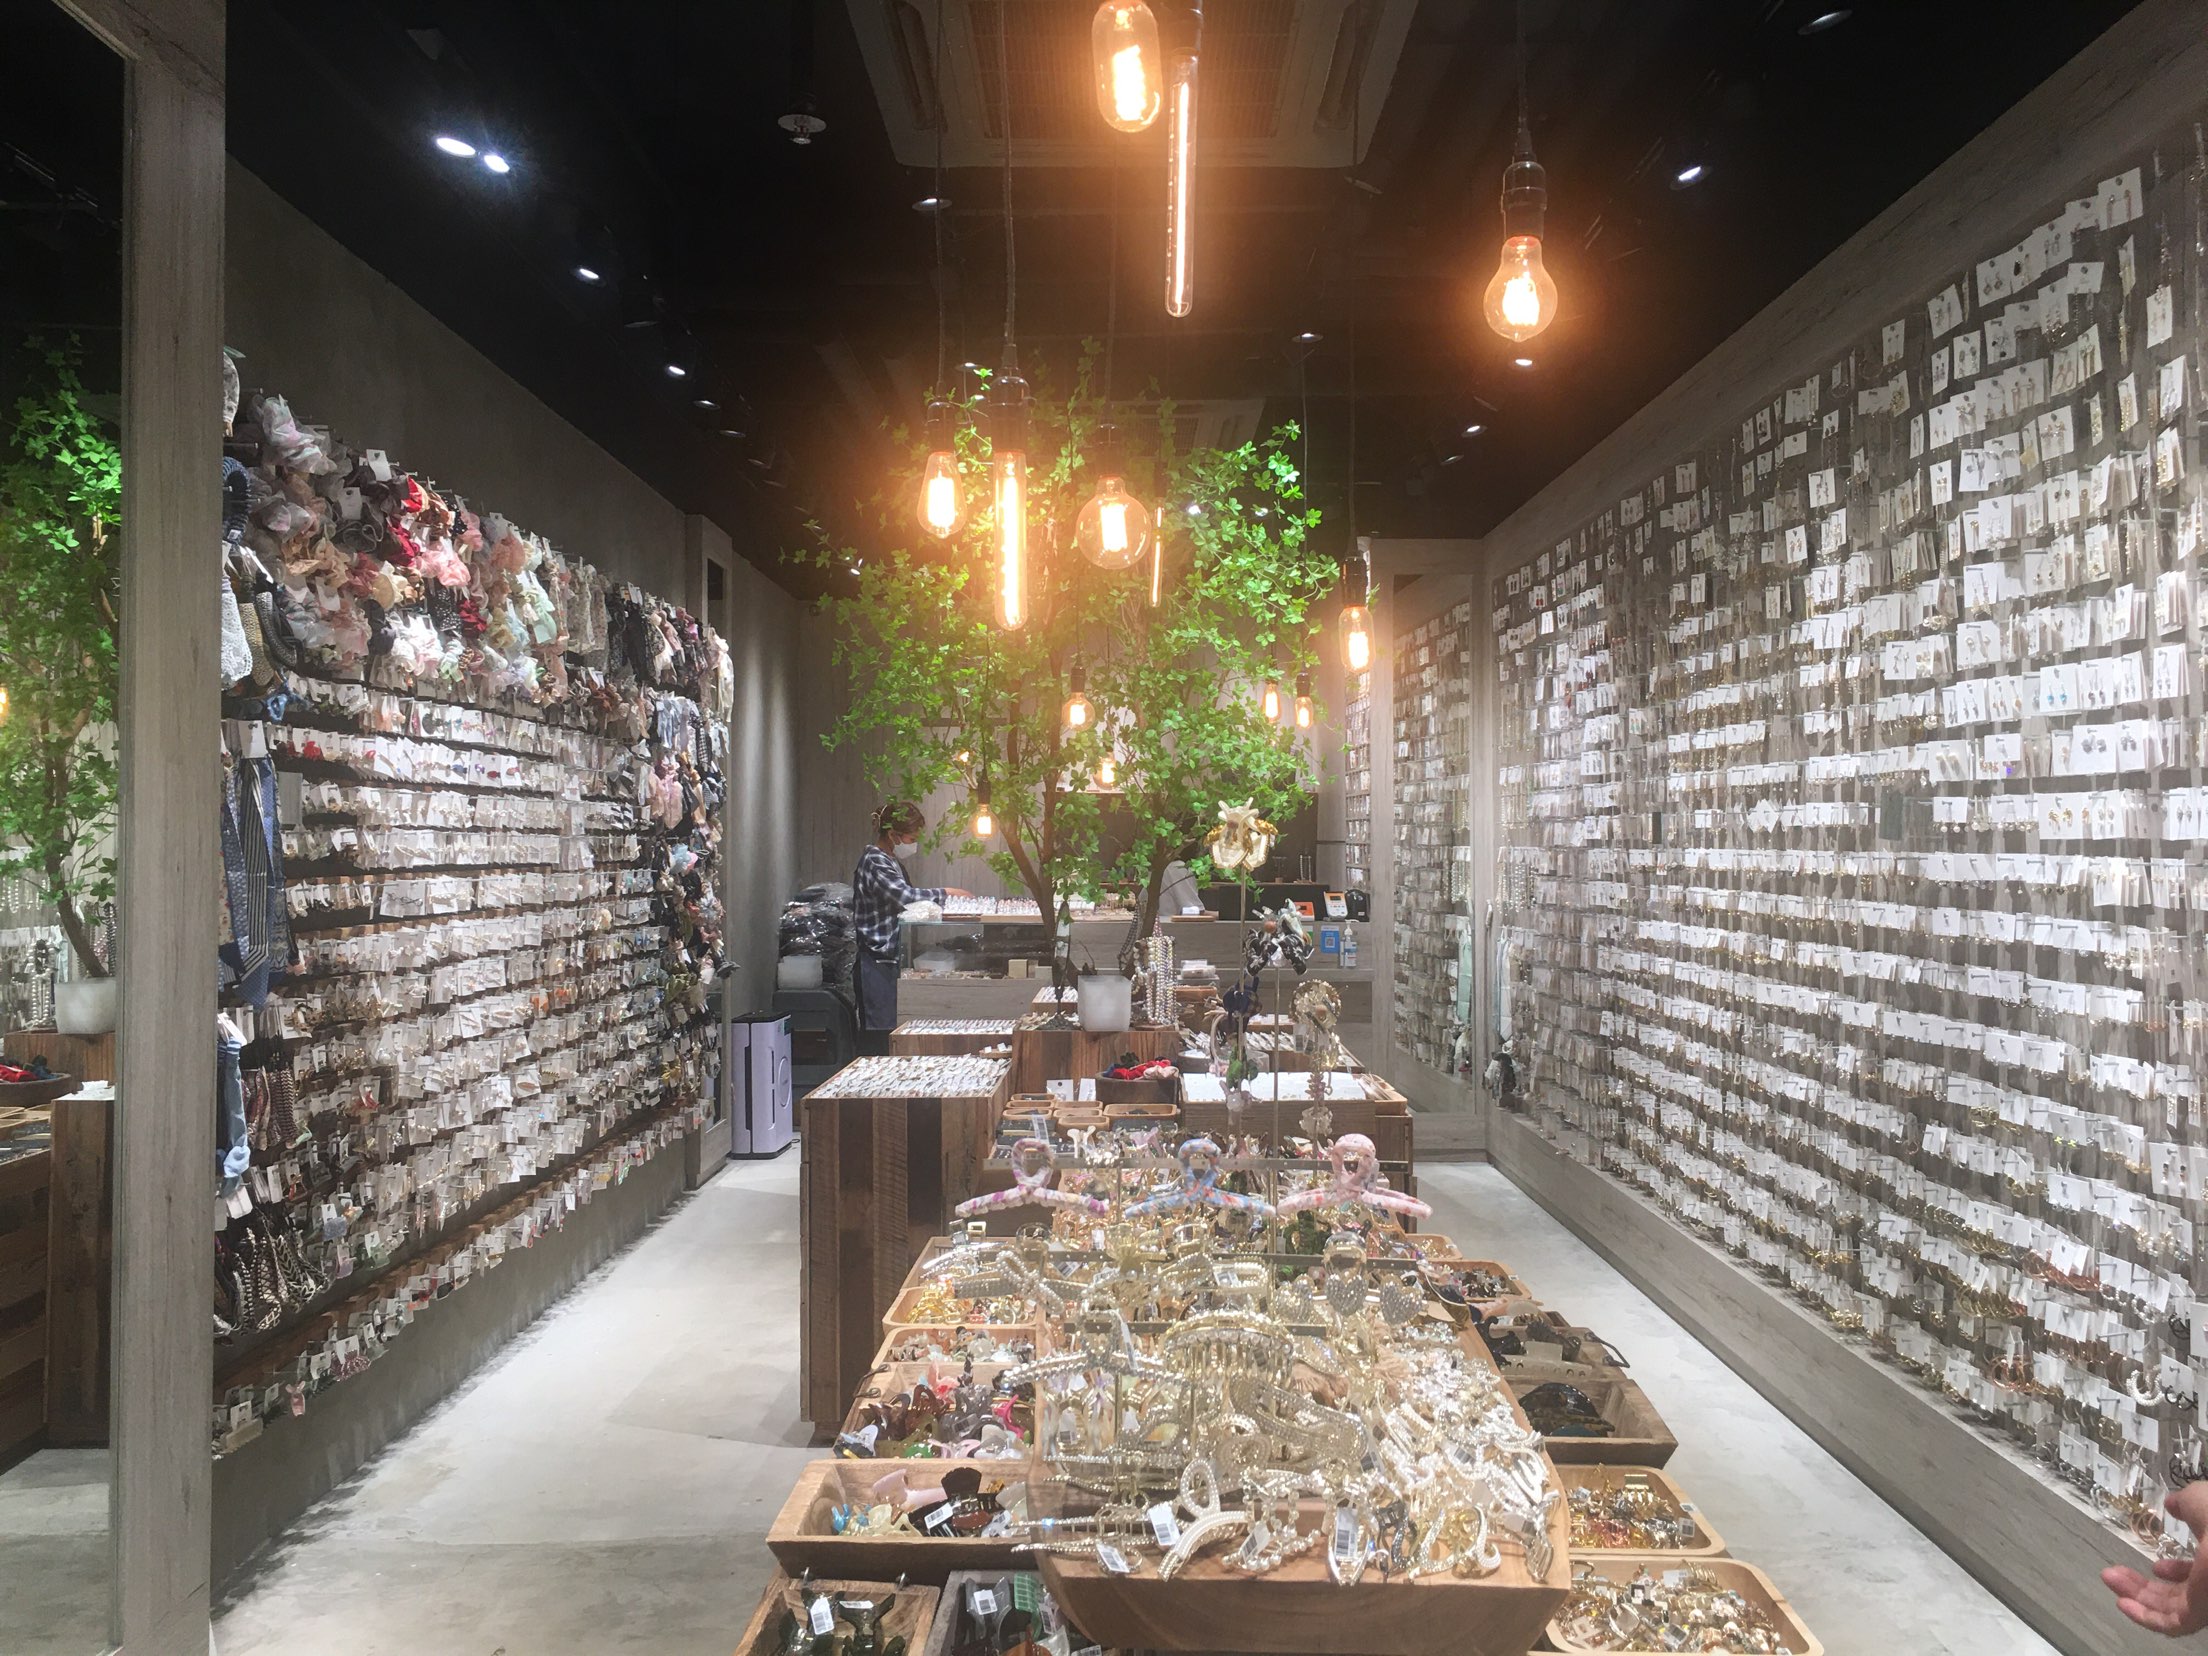 Me: Walls of Accessories for accessories lover 😍 | Trip.com Hong Kong  Travelogues